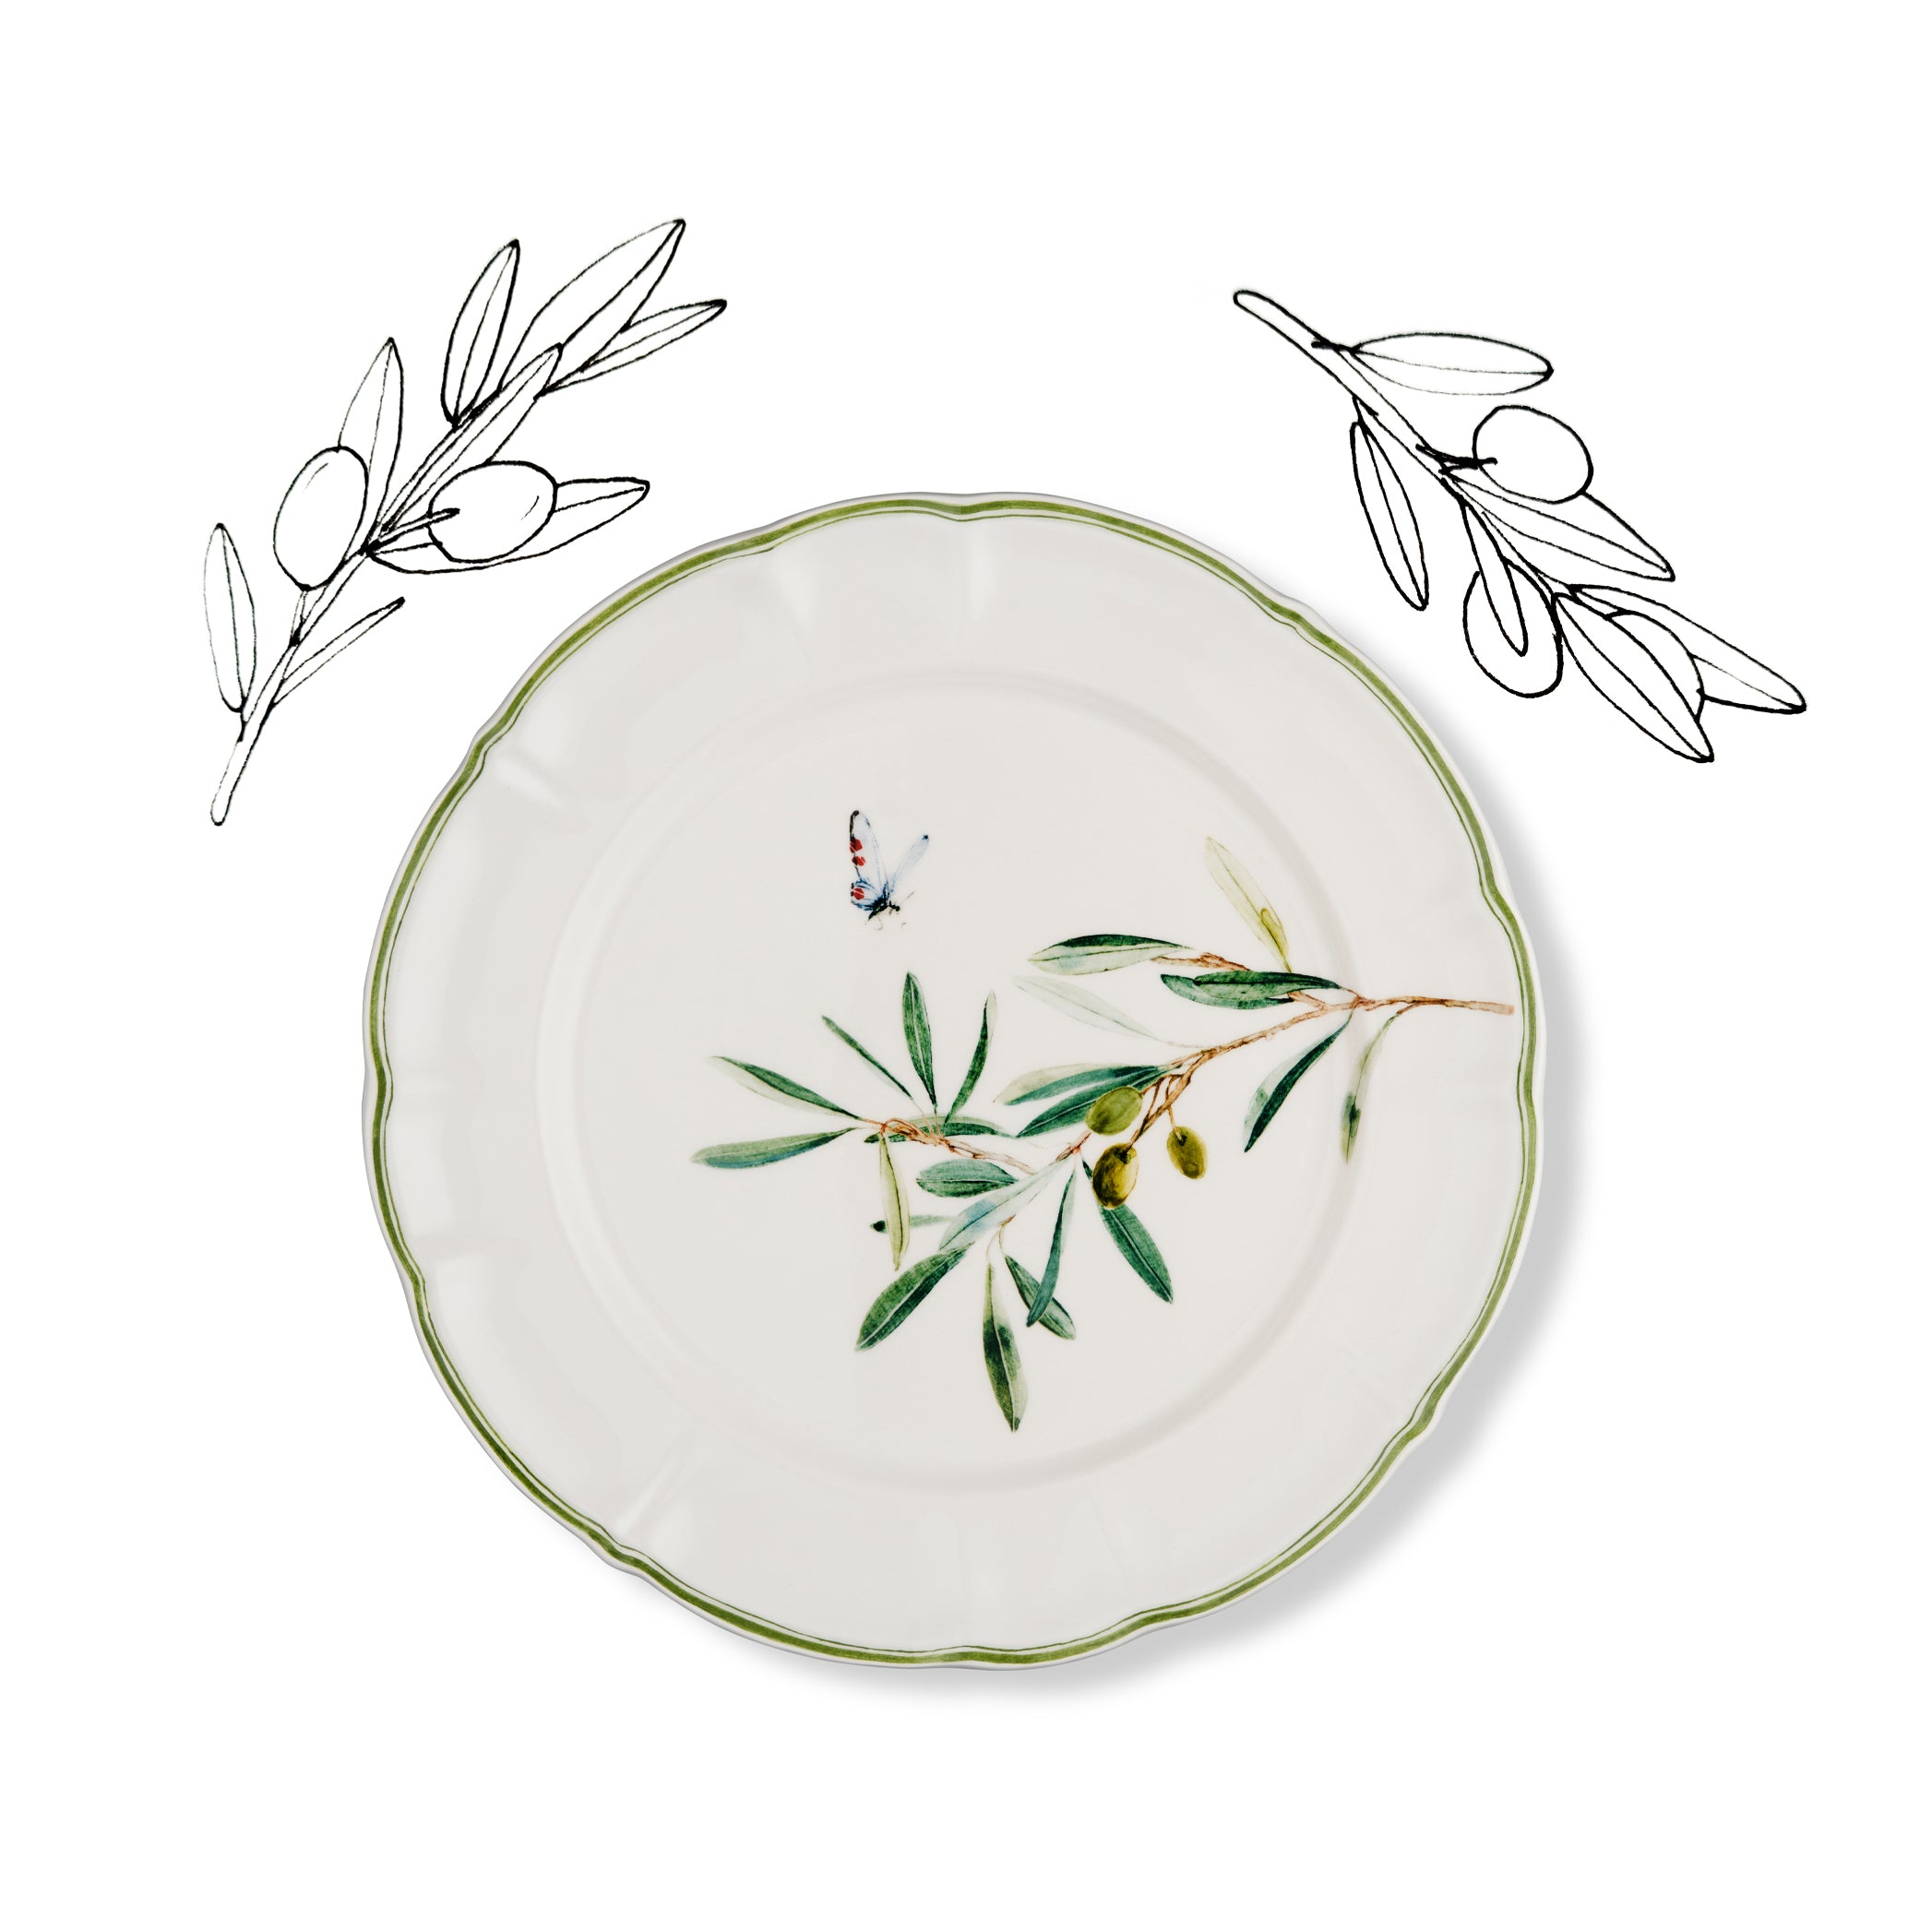 Olive Branch Scalloped Dinner Plate With Blue Butterfly, 26cm